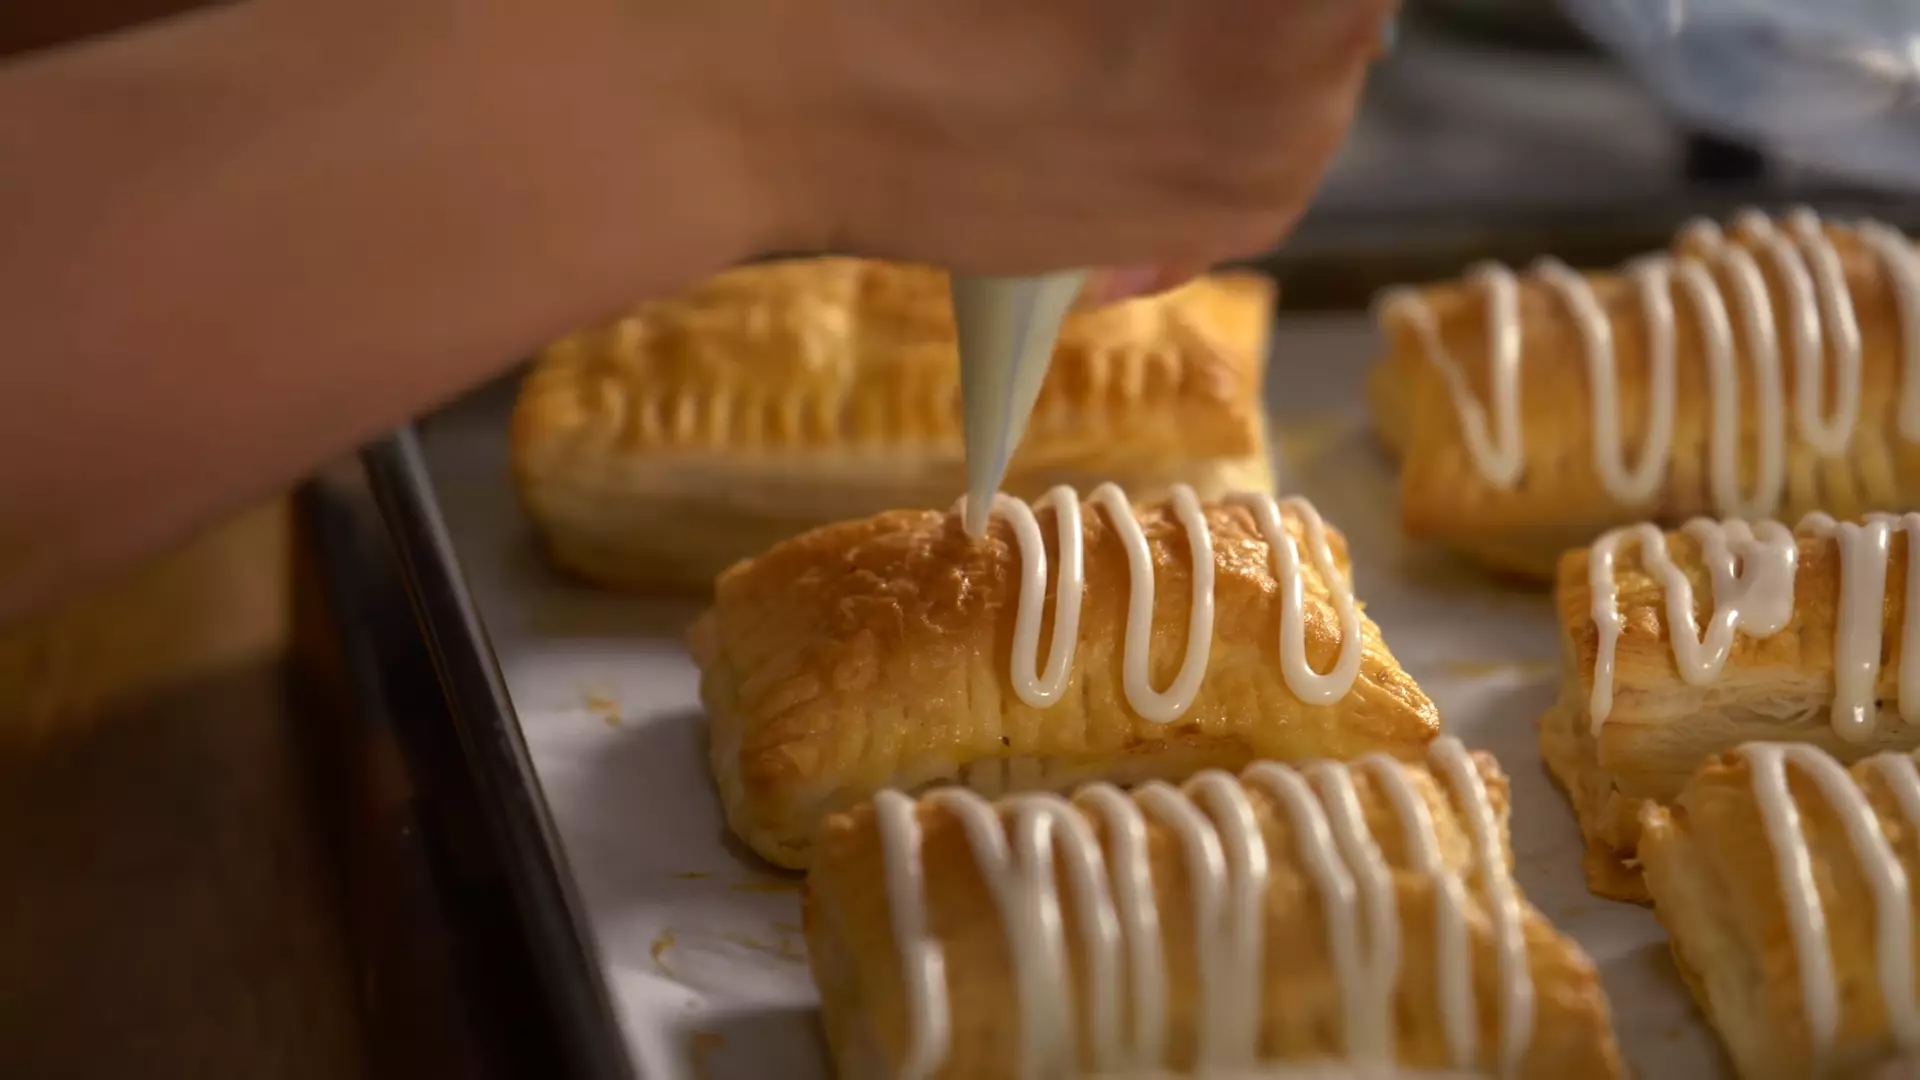 What's the best way to bake Toaster Strudels